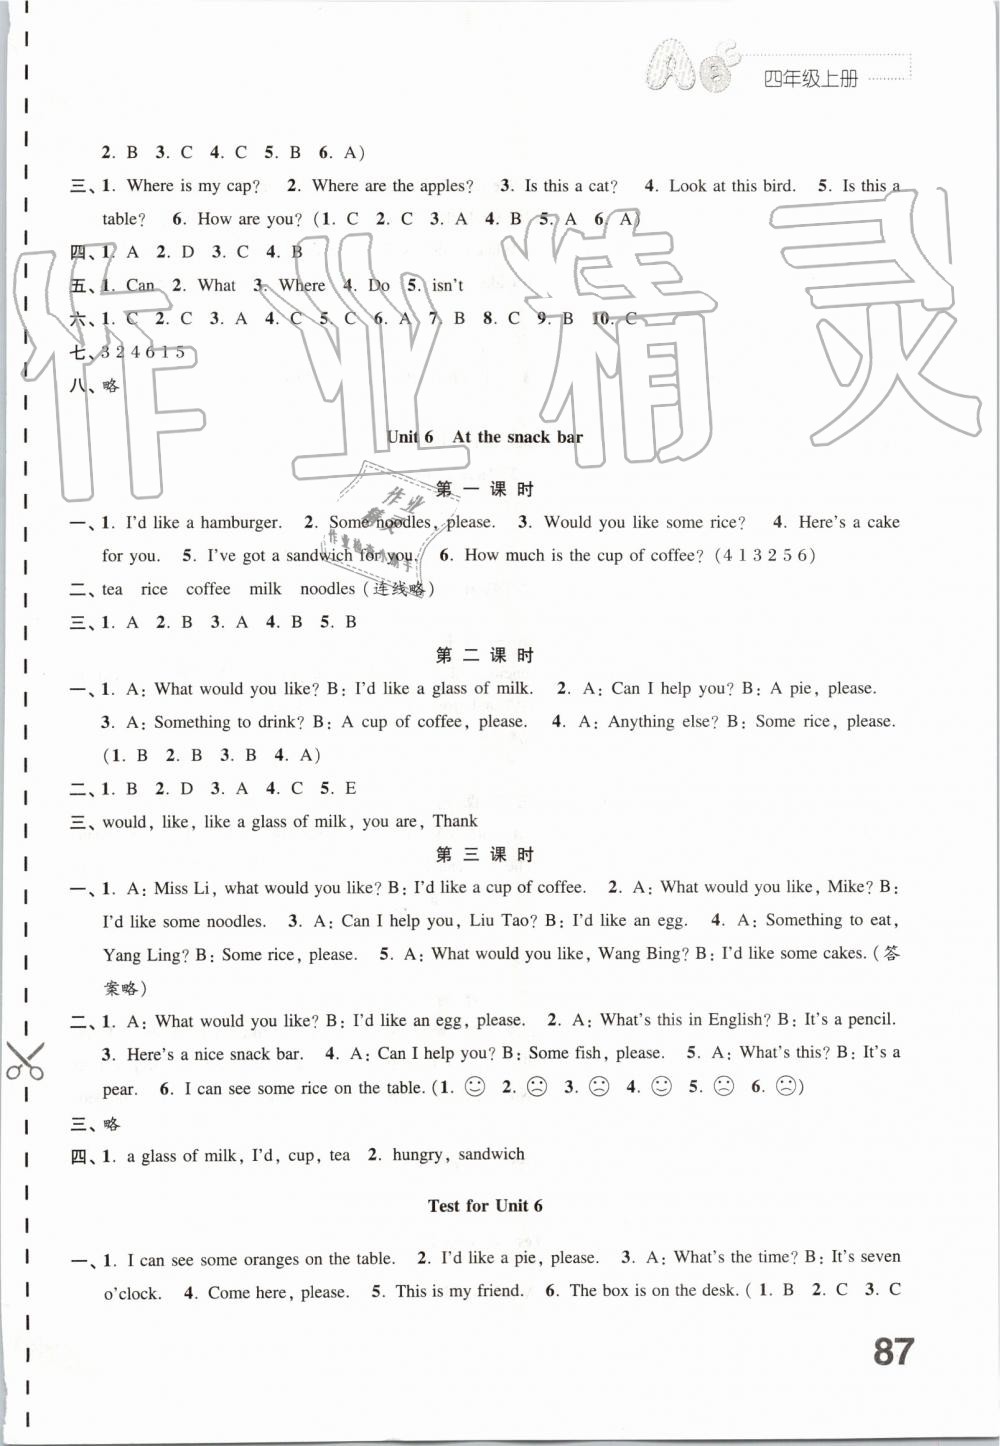 Test for Unit 6 - 第7页